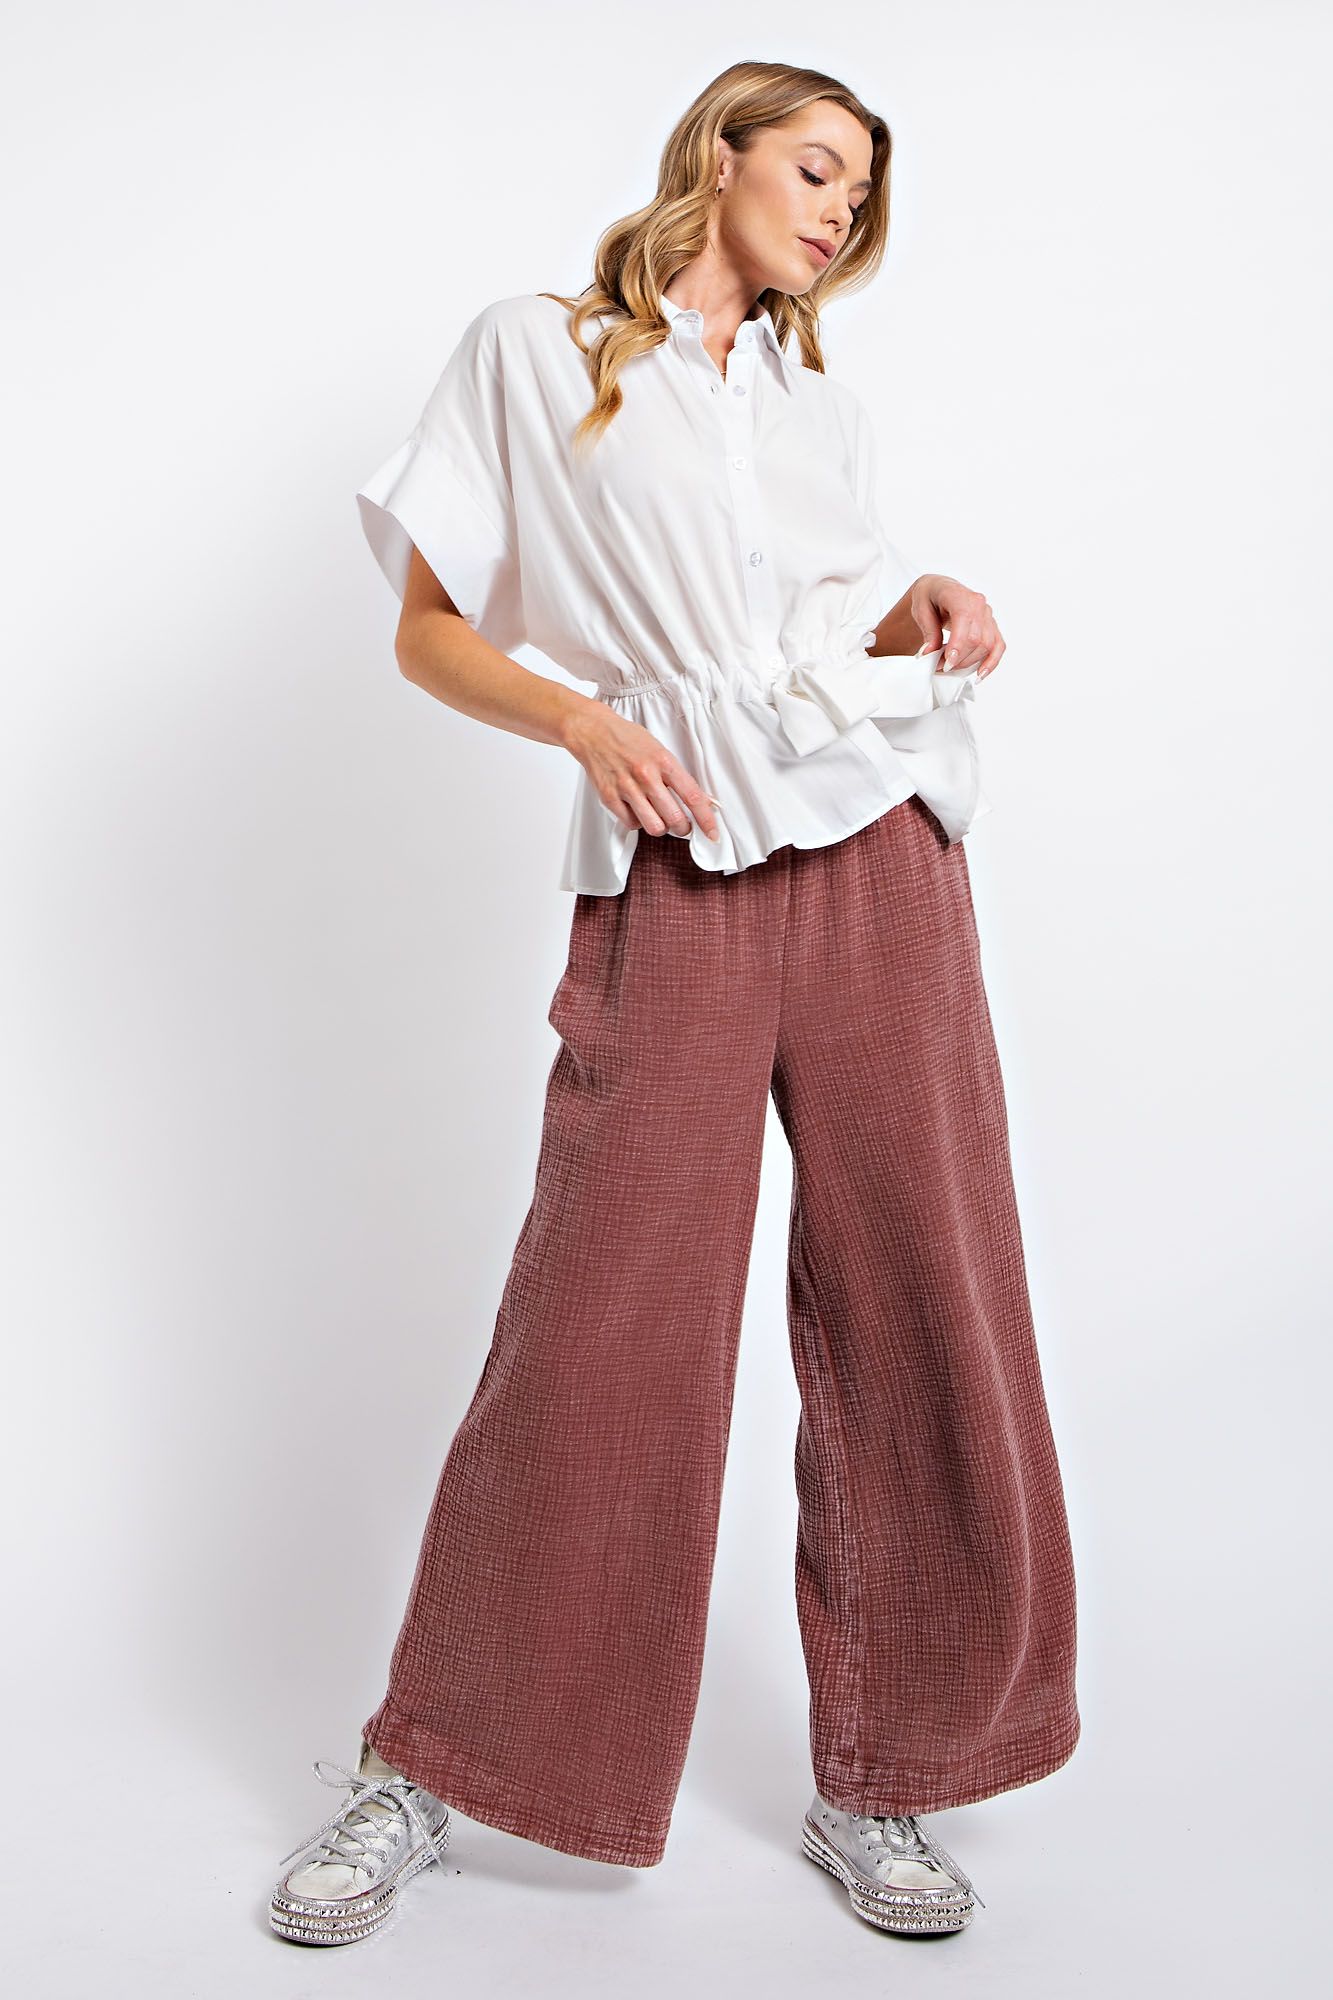 Easel Plus Mineral Washed Relaxed Cotton Gauze Pants